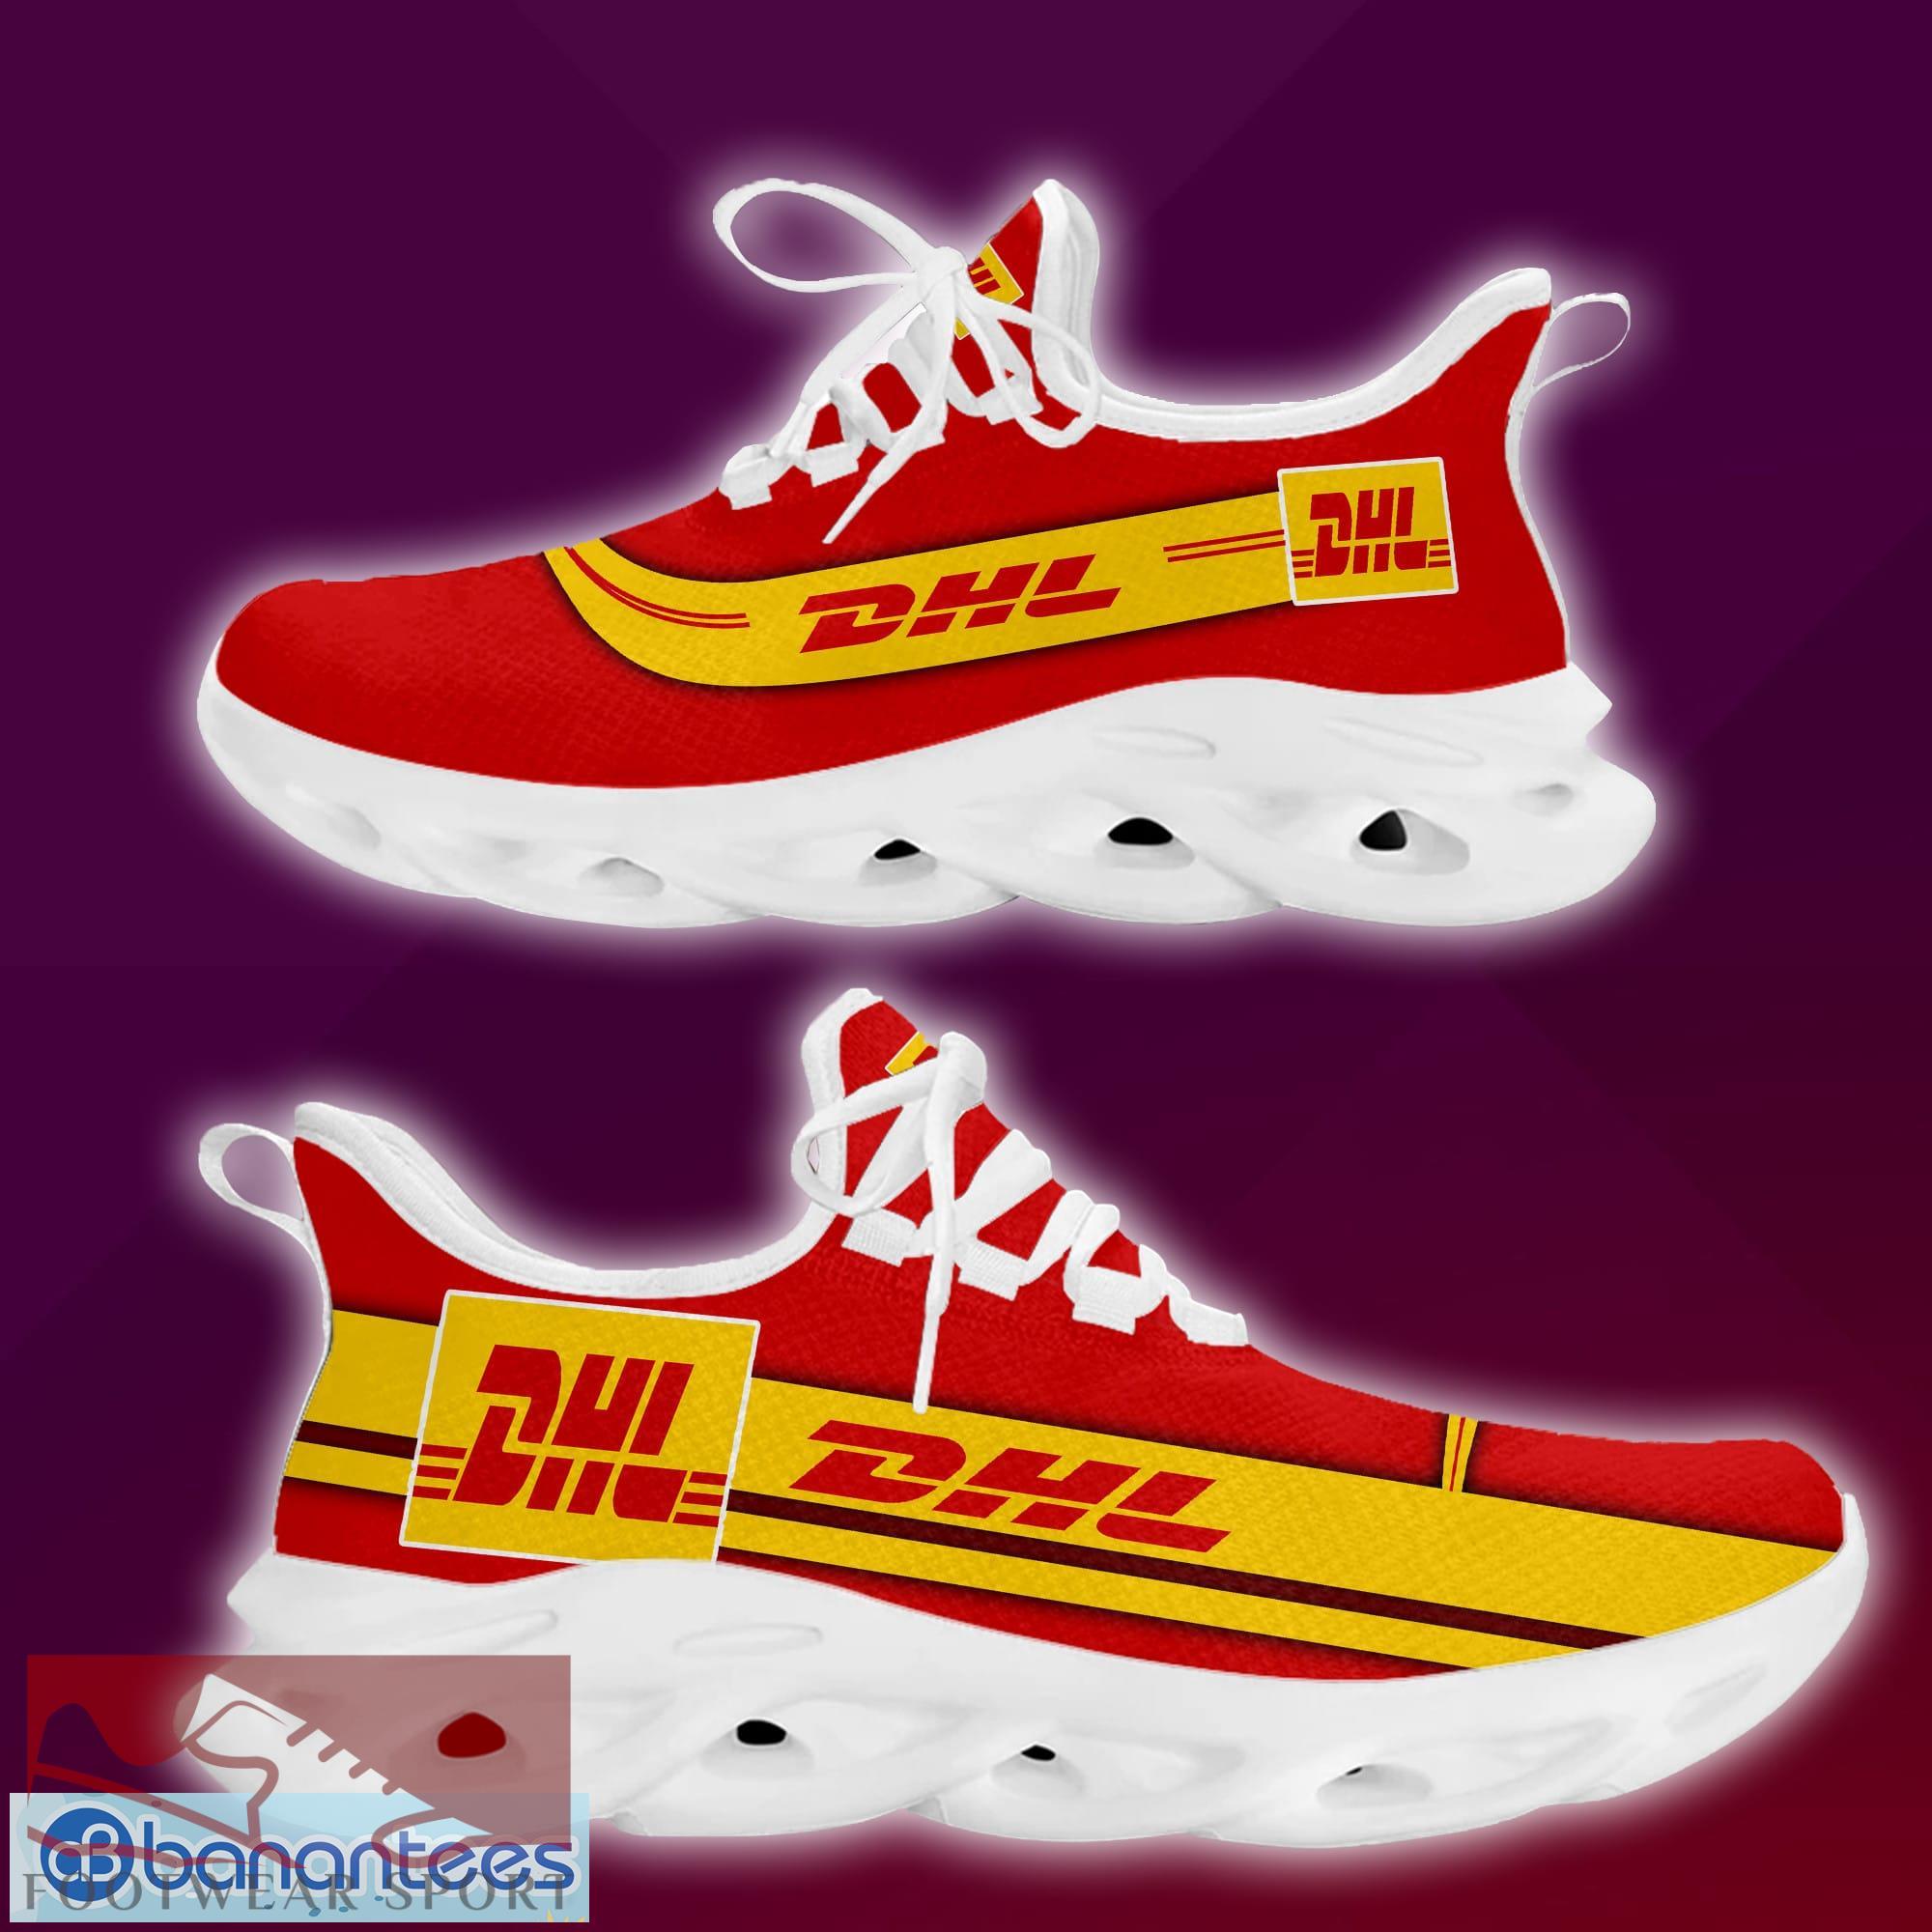 dhl Brand New Logo Max Soul Sneakers Embrace Sport Shoes Gift - dhl New Brand Chunky Shoes Style Max Soul Sneakers Photo 2